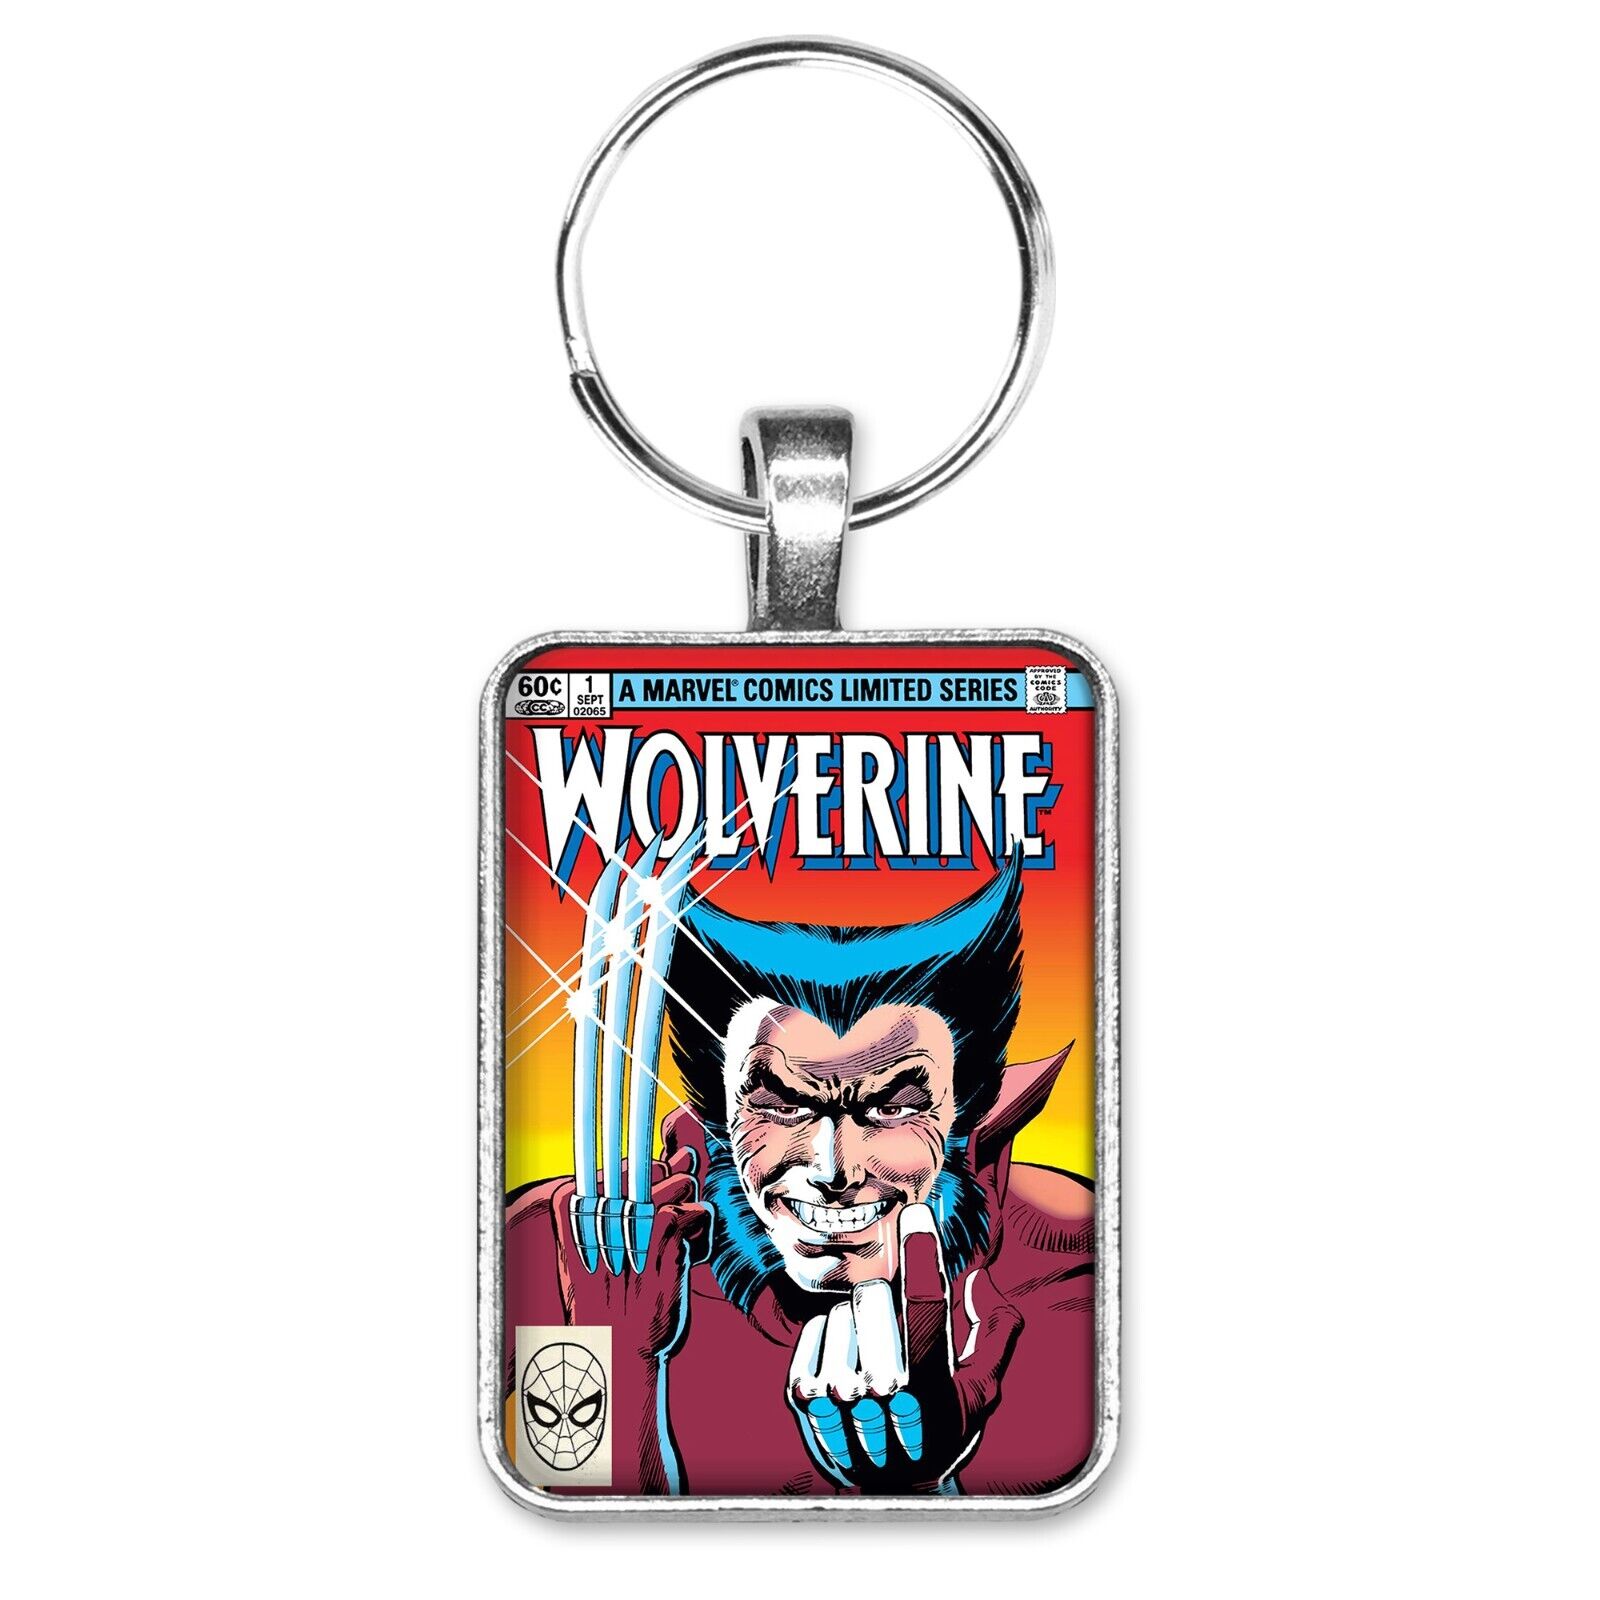 Wolverine Mini Series #1 CLASSIC Cover Key Ring or Necklace Marvel Comic Jewelry